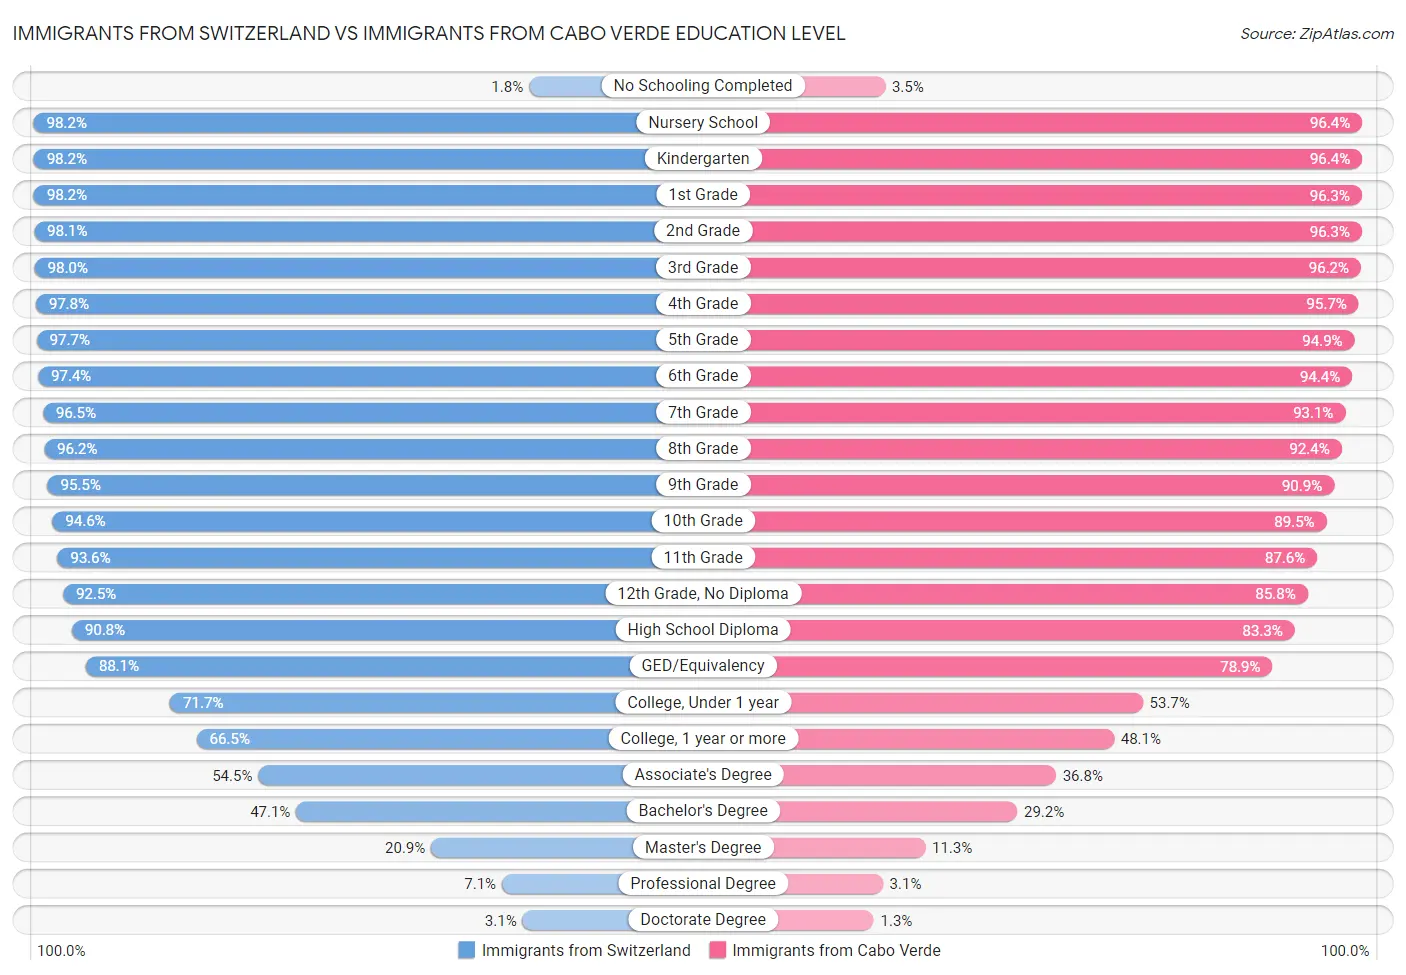 Immigrants from Switzerland vs Immigrants from Cabo Verde Education Level